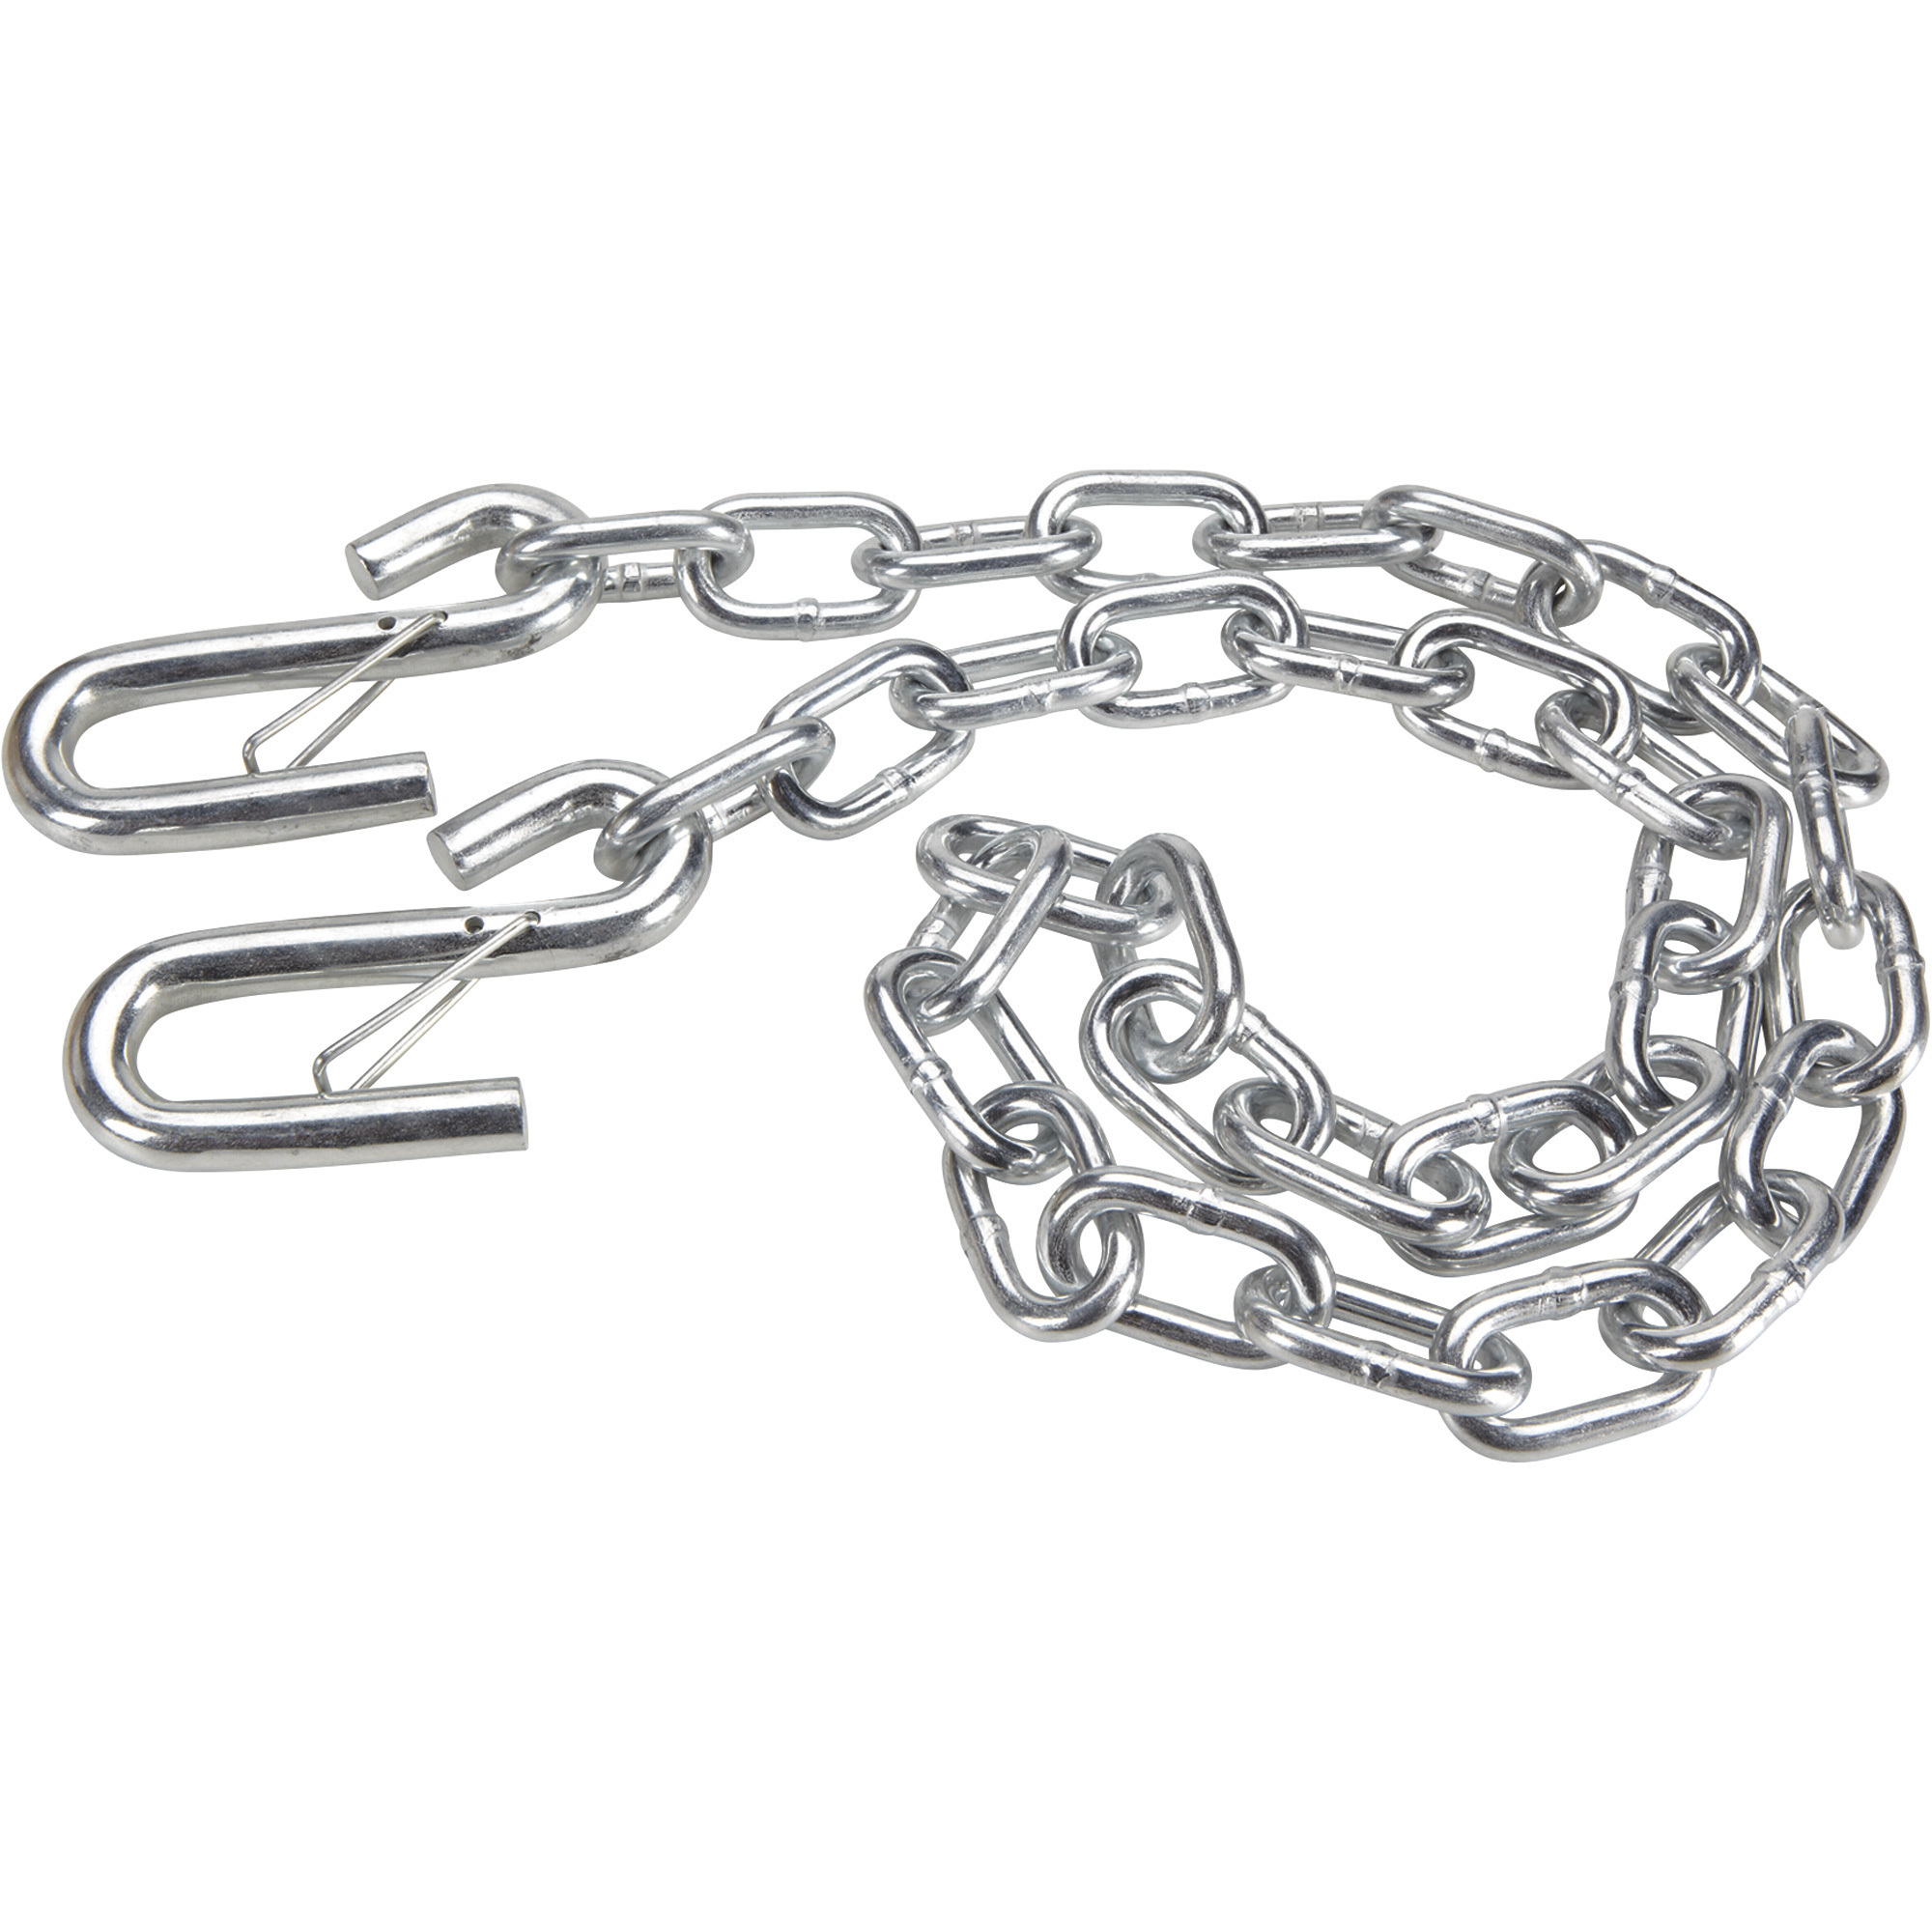 Ultra-Tow Safety Tow Chain with S-Hook, 1/4Inch x 48Inch Chain, 2,000-Lb. Capacity